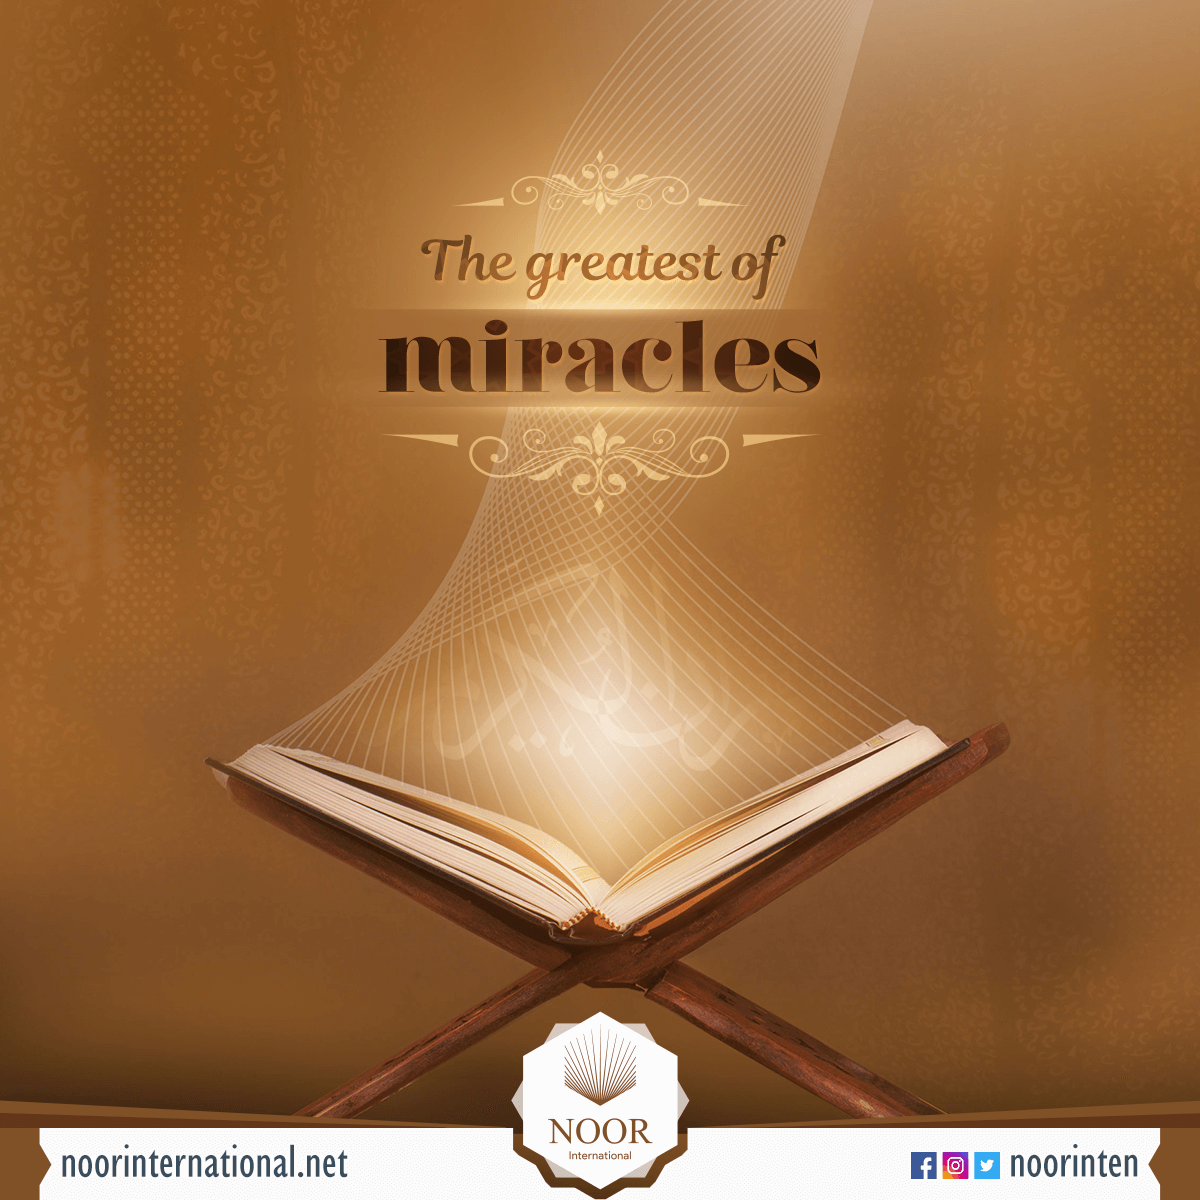 The scientific miracules aspects of the Quran